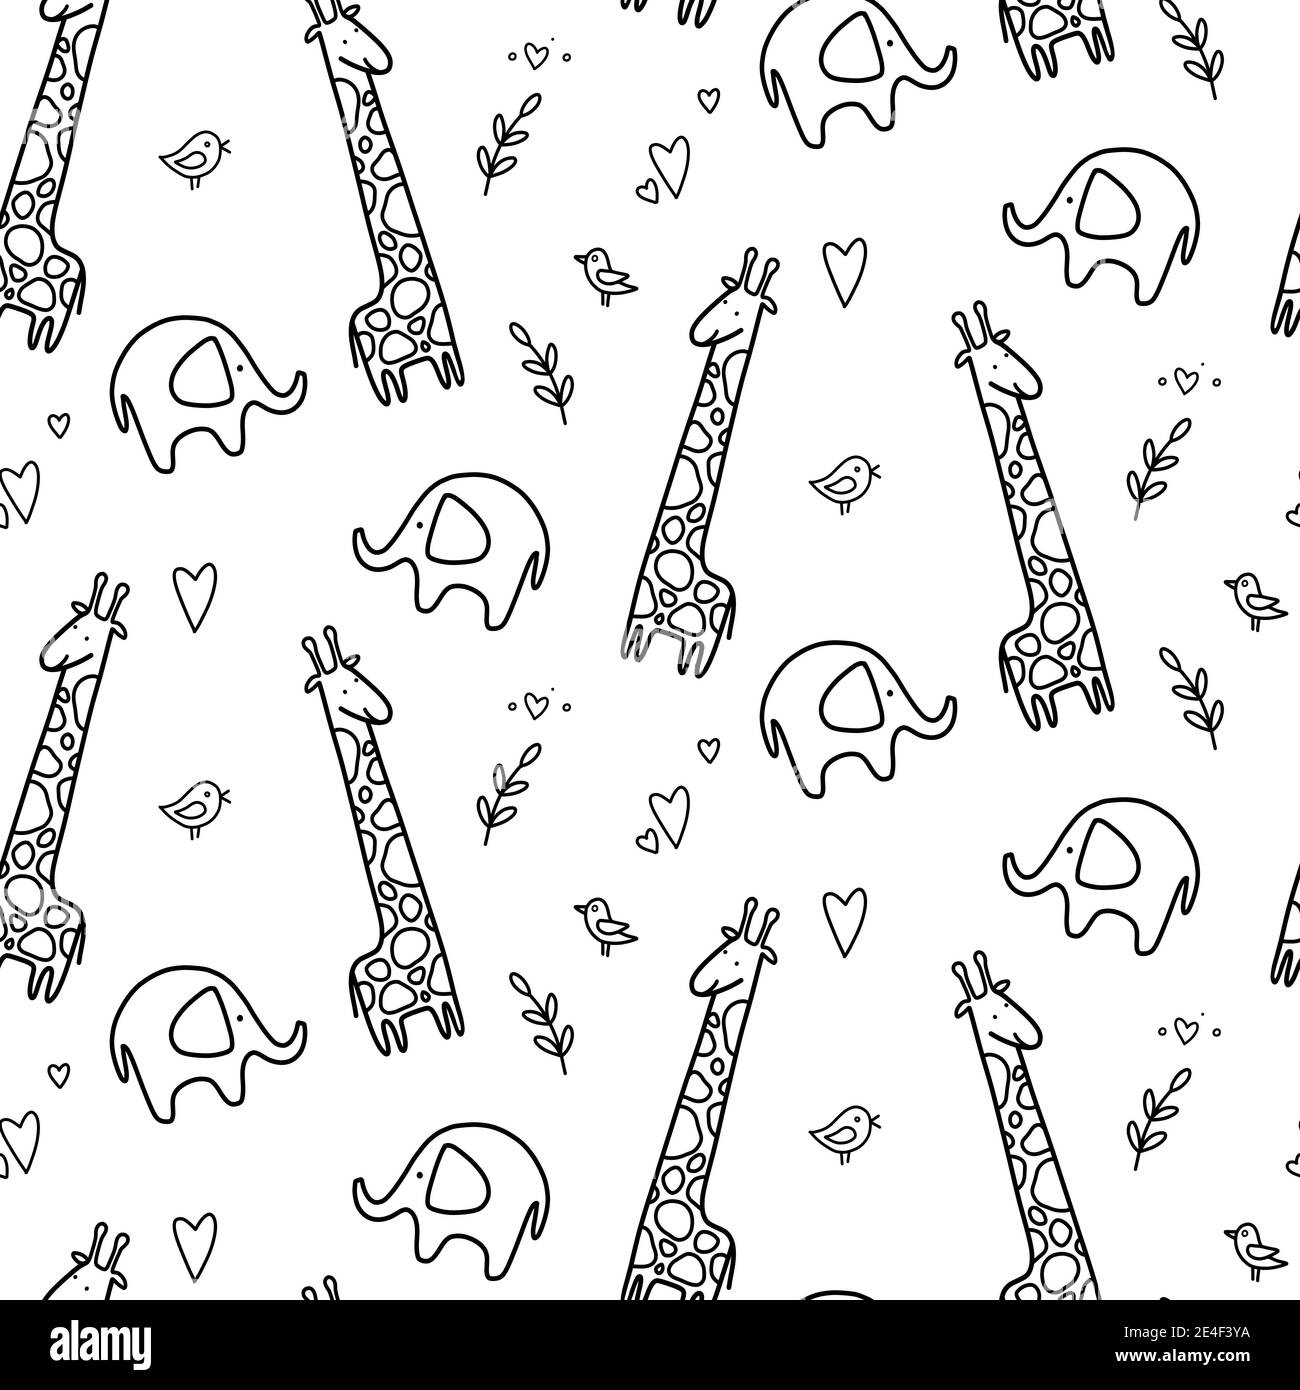 hand drawn baby seamless pattern with giraffe, elephant. Vector illustration. doodle kid pattern isolated. Kid birthday line pattern. Stock Vector